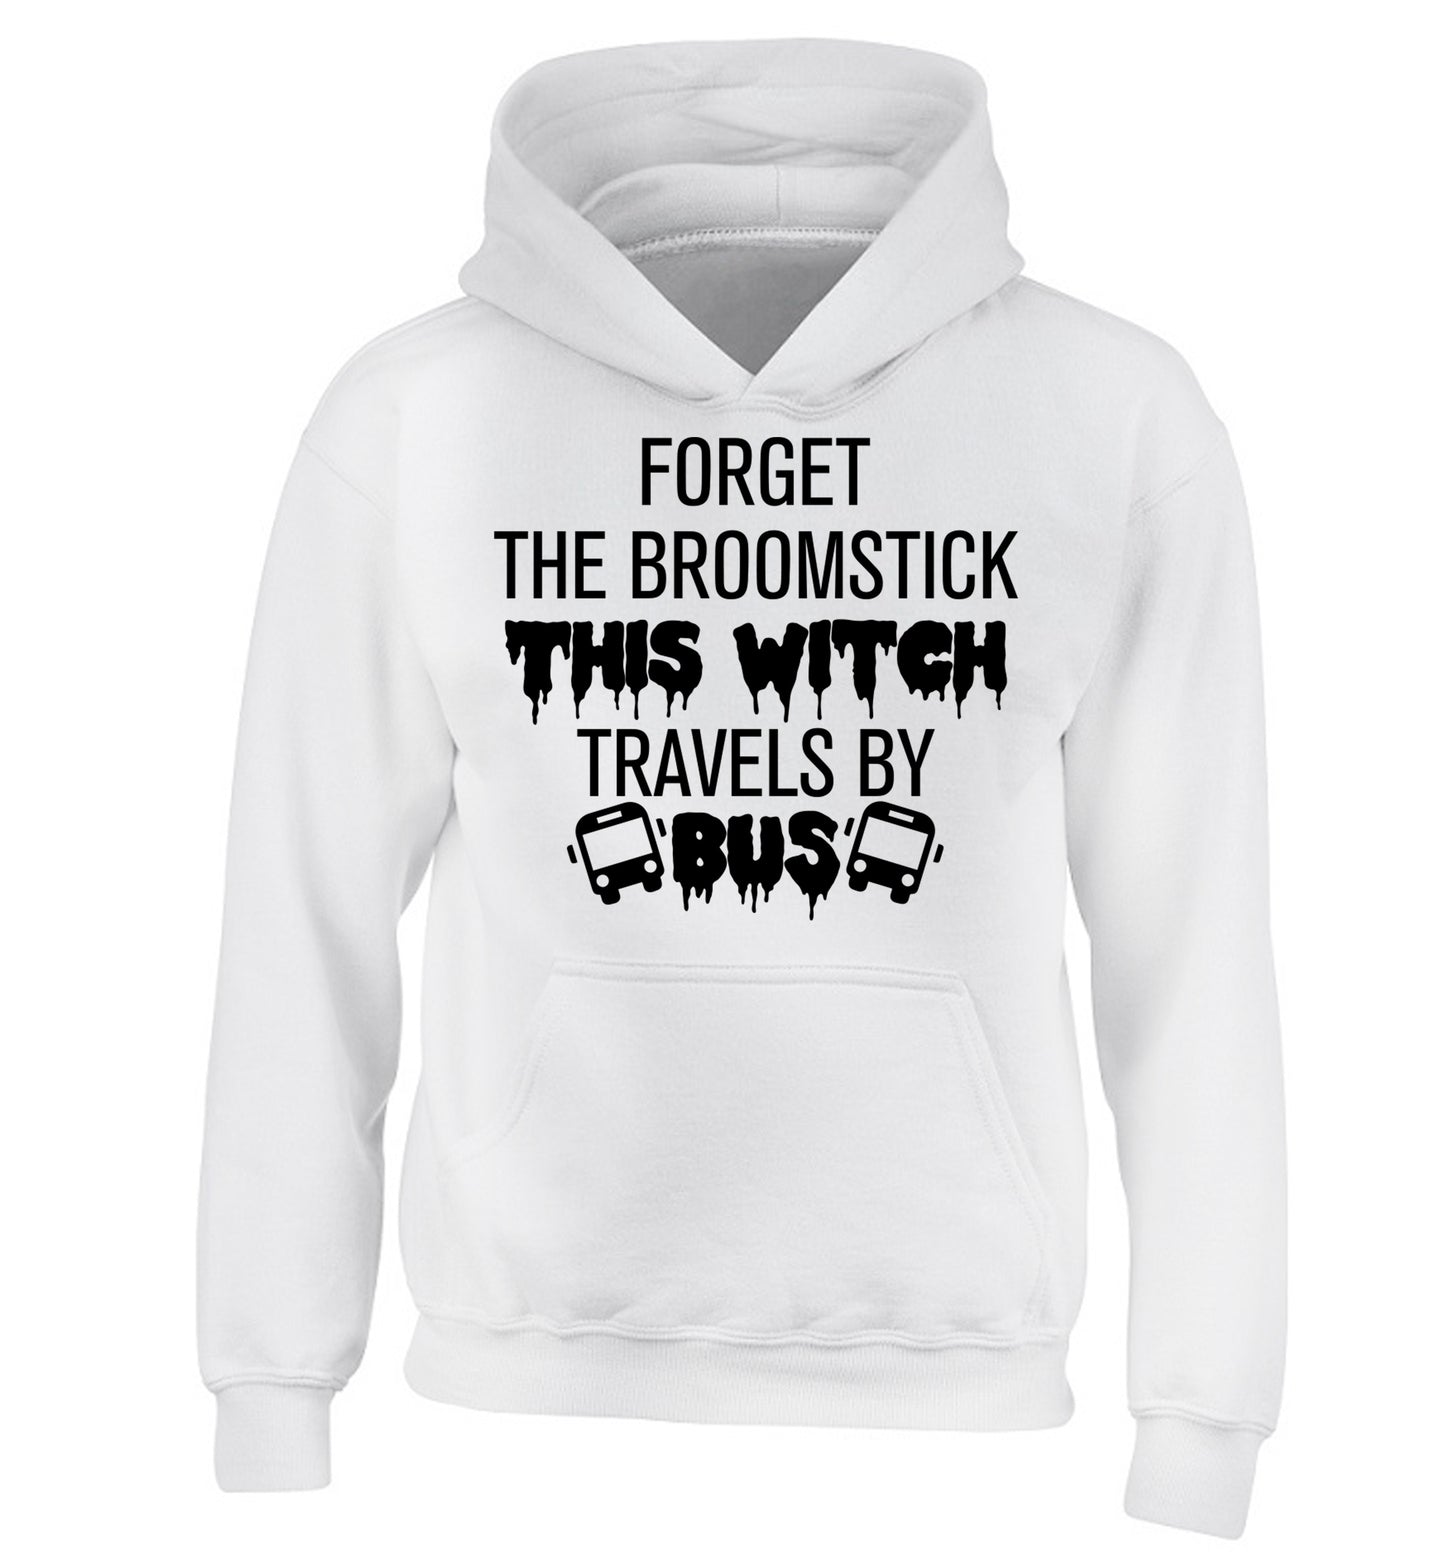 Forget the broomstick this witch travels by bus children's white hoodie 12-14 Years